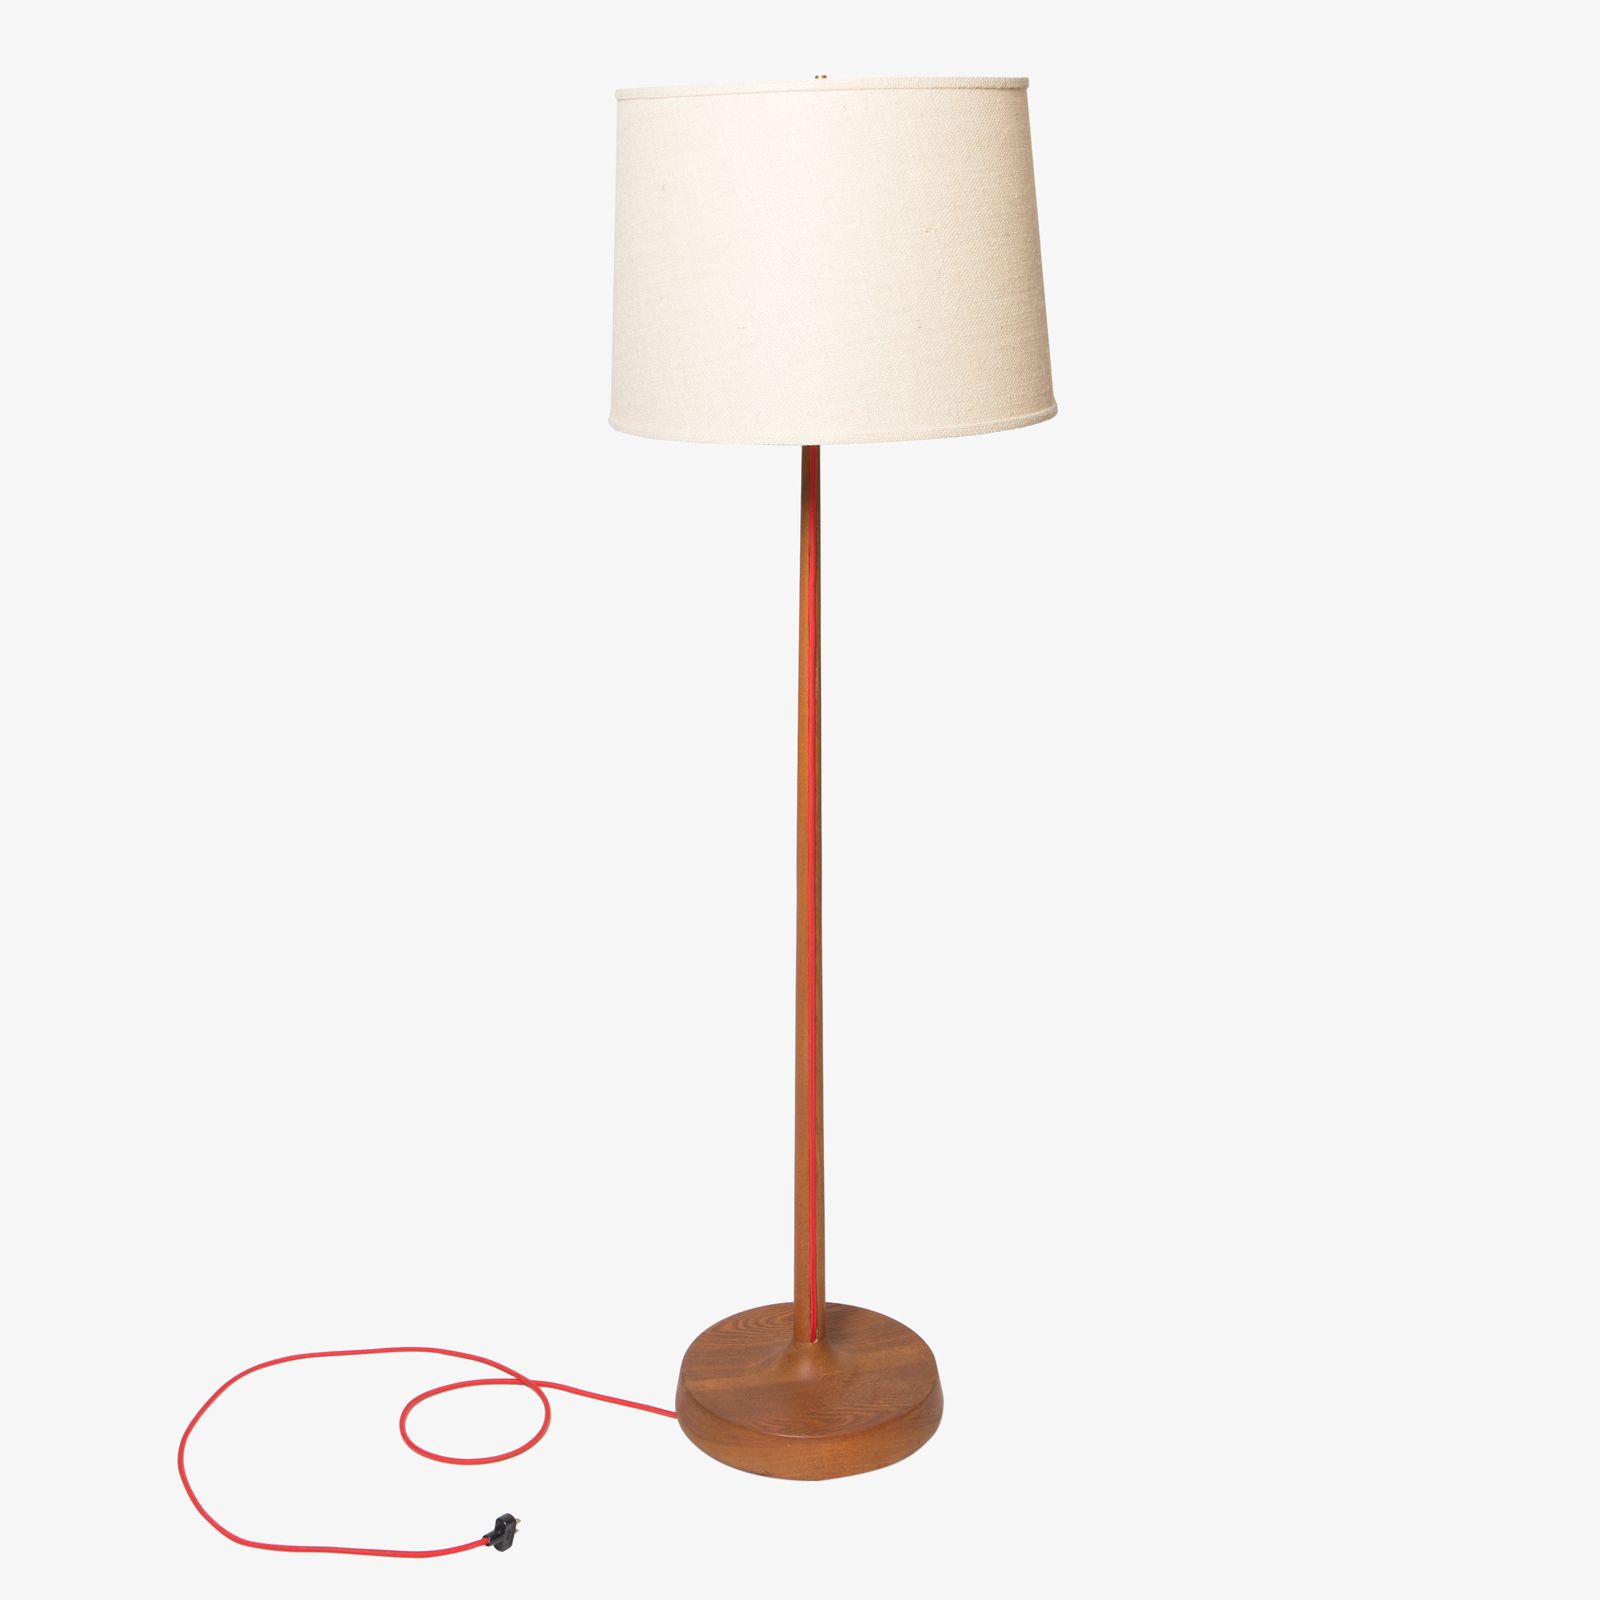 Solid Oak Floor Lamp With Orange Cord And Original Woven Shade 1960's –  Regeneration With Orange Floor Lamps (View 14 of 15)